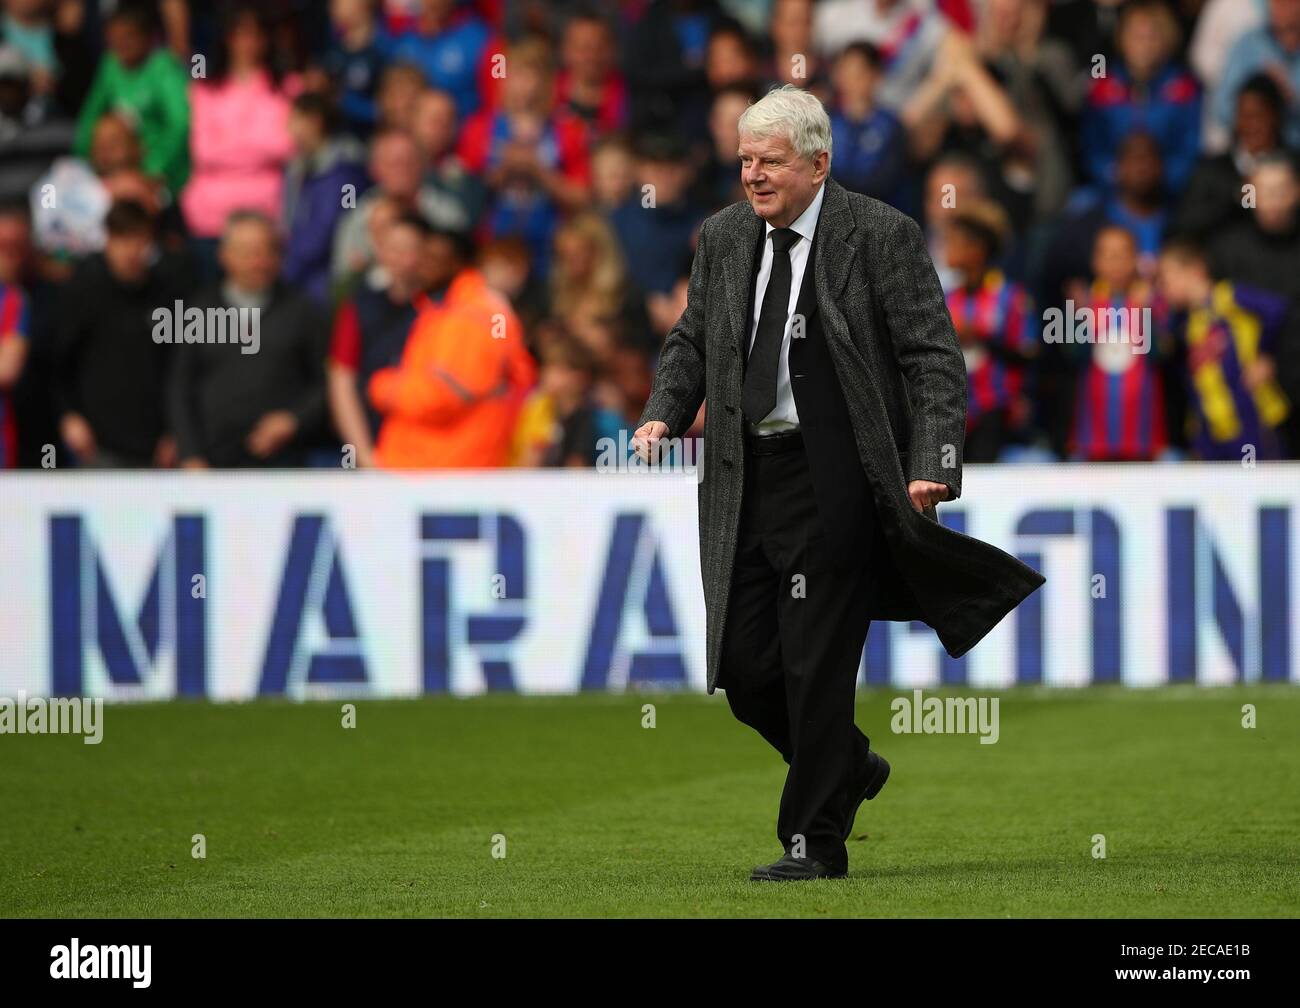 Soccer Football - Premier League - Crystal Palace vs West Bromwich Albion - Selhurst Park, London, Britain - May 13, 2018   Commentator John Motson after the match   REUTERS/Hannah McKay    EDITORIAL USE ONLY. No use with unauthorized audio, video, data, fixture lists, club/league logos or 'live' services. Online in-match use limited to 75 images, no video emulation. No use in betting, games or single club/league/player publications.  Please contact your account representative for further details. Stock Photo